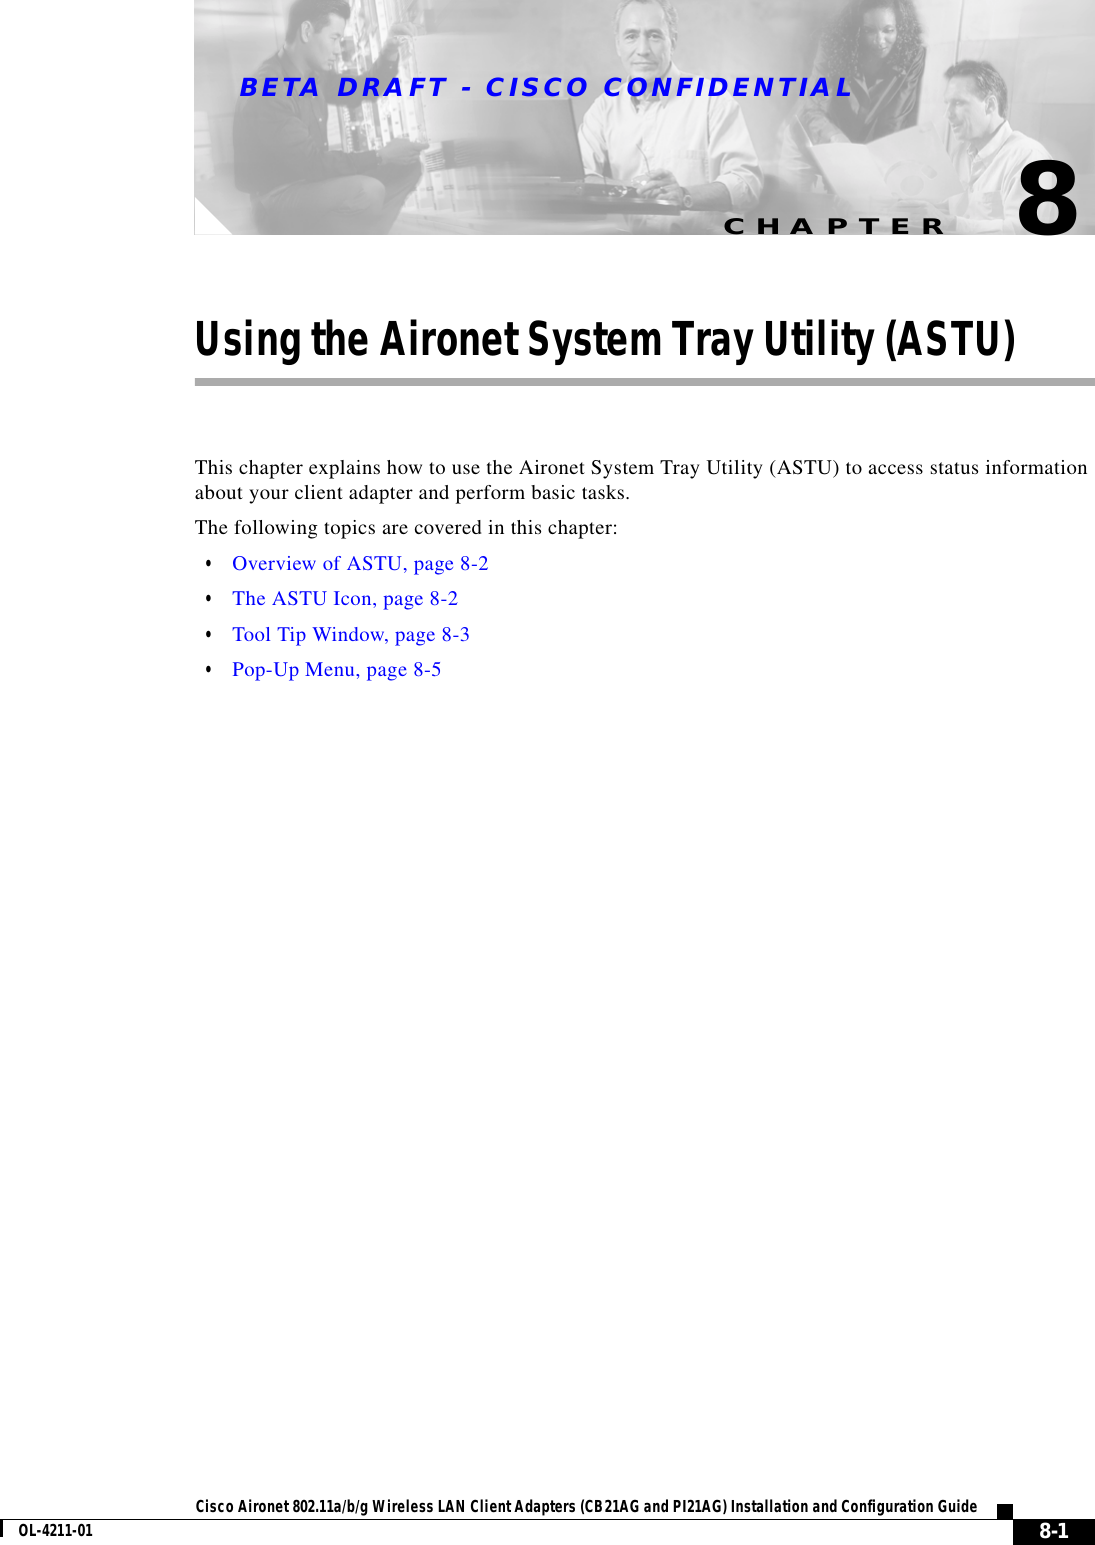 CHAPTERBETA DRAFT - CISCO CONFIDENTIAL8-1Cisco Aironet 802.11a/b/g Wireless LAN Client Adapters (CB21AG and PI21AG) Installation and Configuration GuideOL-4211-018Using the Aironet System Tray Utility (ASTU)This chapter explains how to use the Aironet System Tray Utility (ASTU) to access status information about your client adapter and perform basic tasks.The following topics are covered in this chapter:•Overview of ASTU, page 8-2•The ASTU Icon, page 8-2•Tool Tip Window, page 8-3•Pop-Up Menu, page 8-5